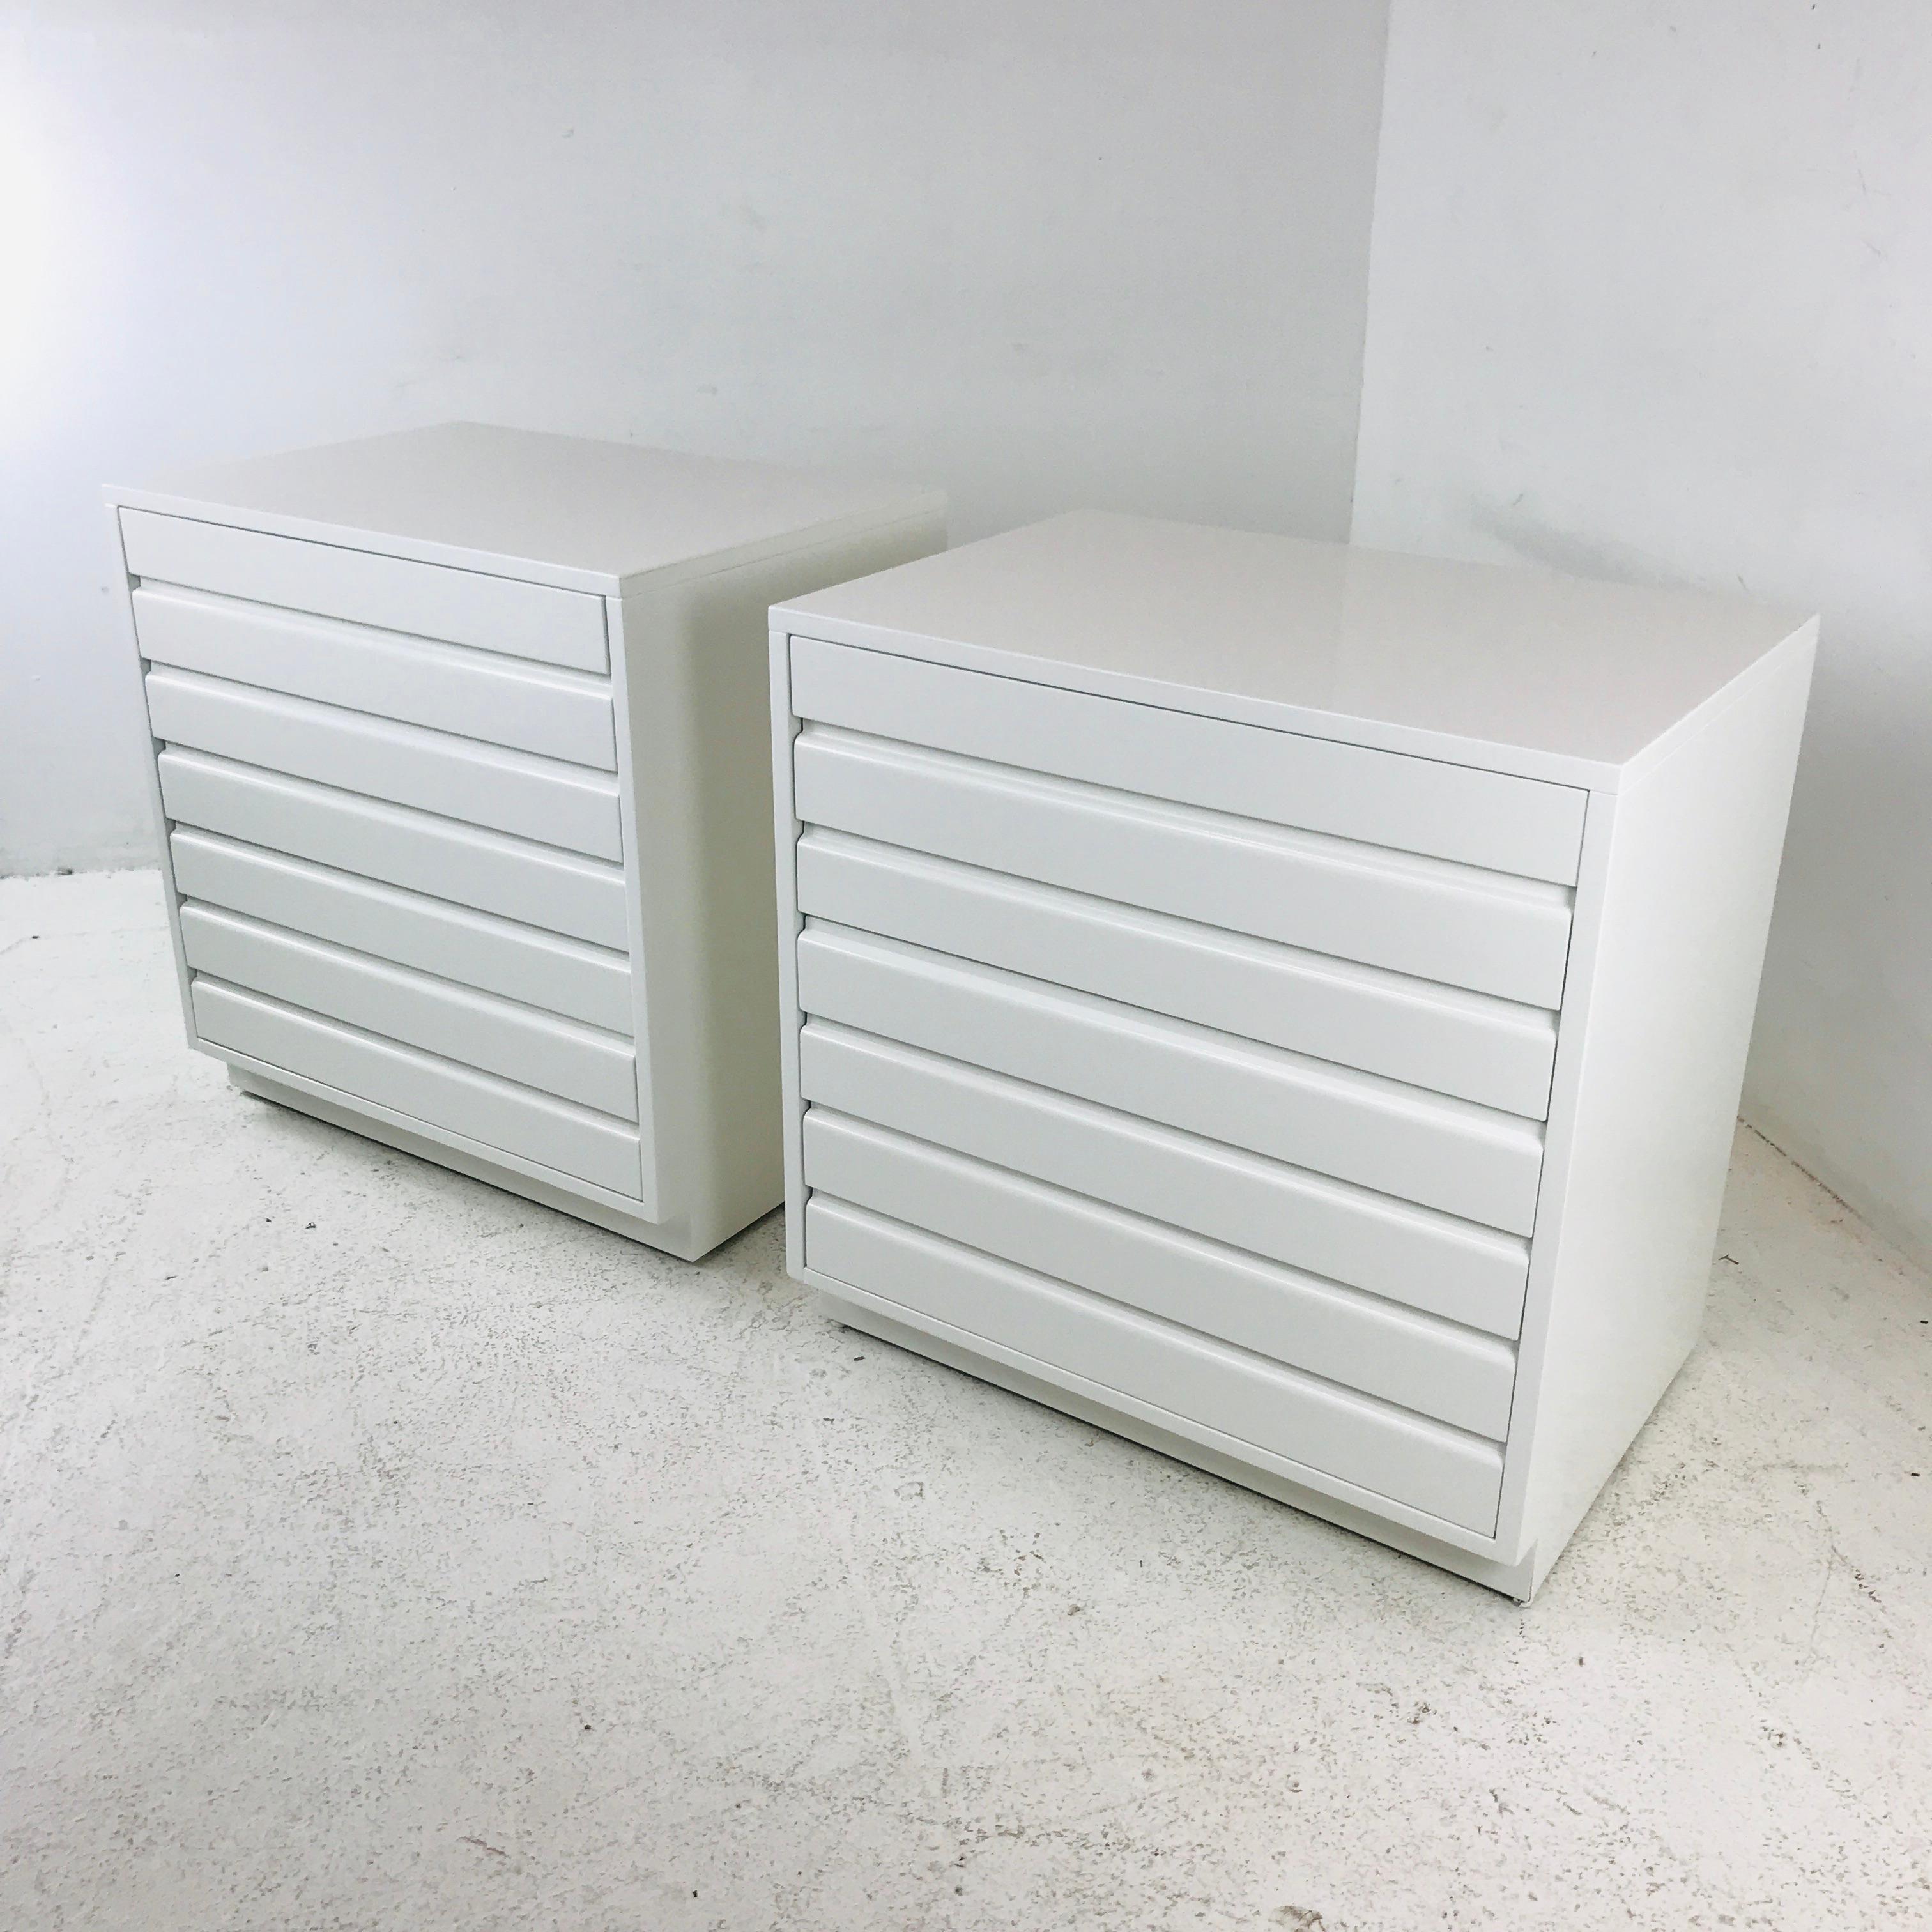 This pair of Sligh chests is newly refinished and lacquered in white. Chests have four drawers each and are perfect for nightstands.